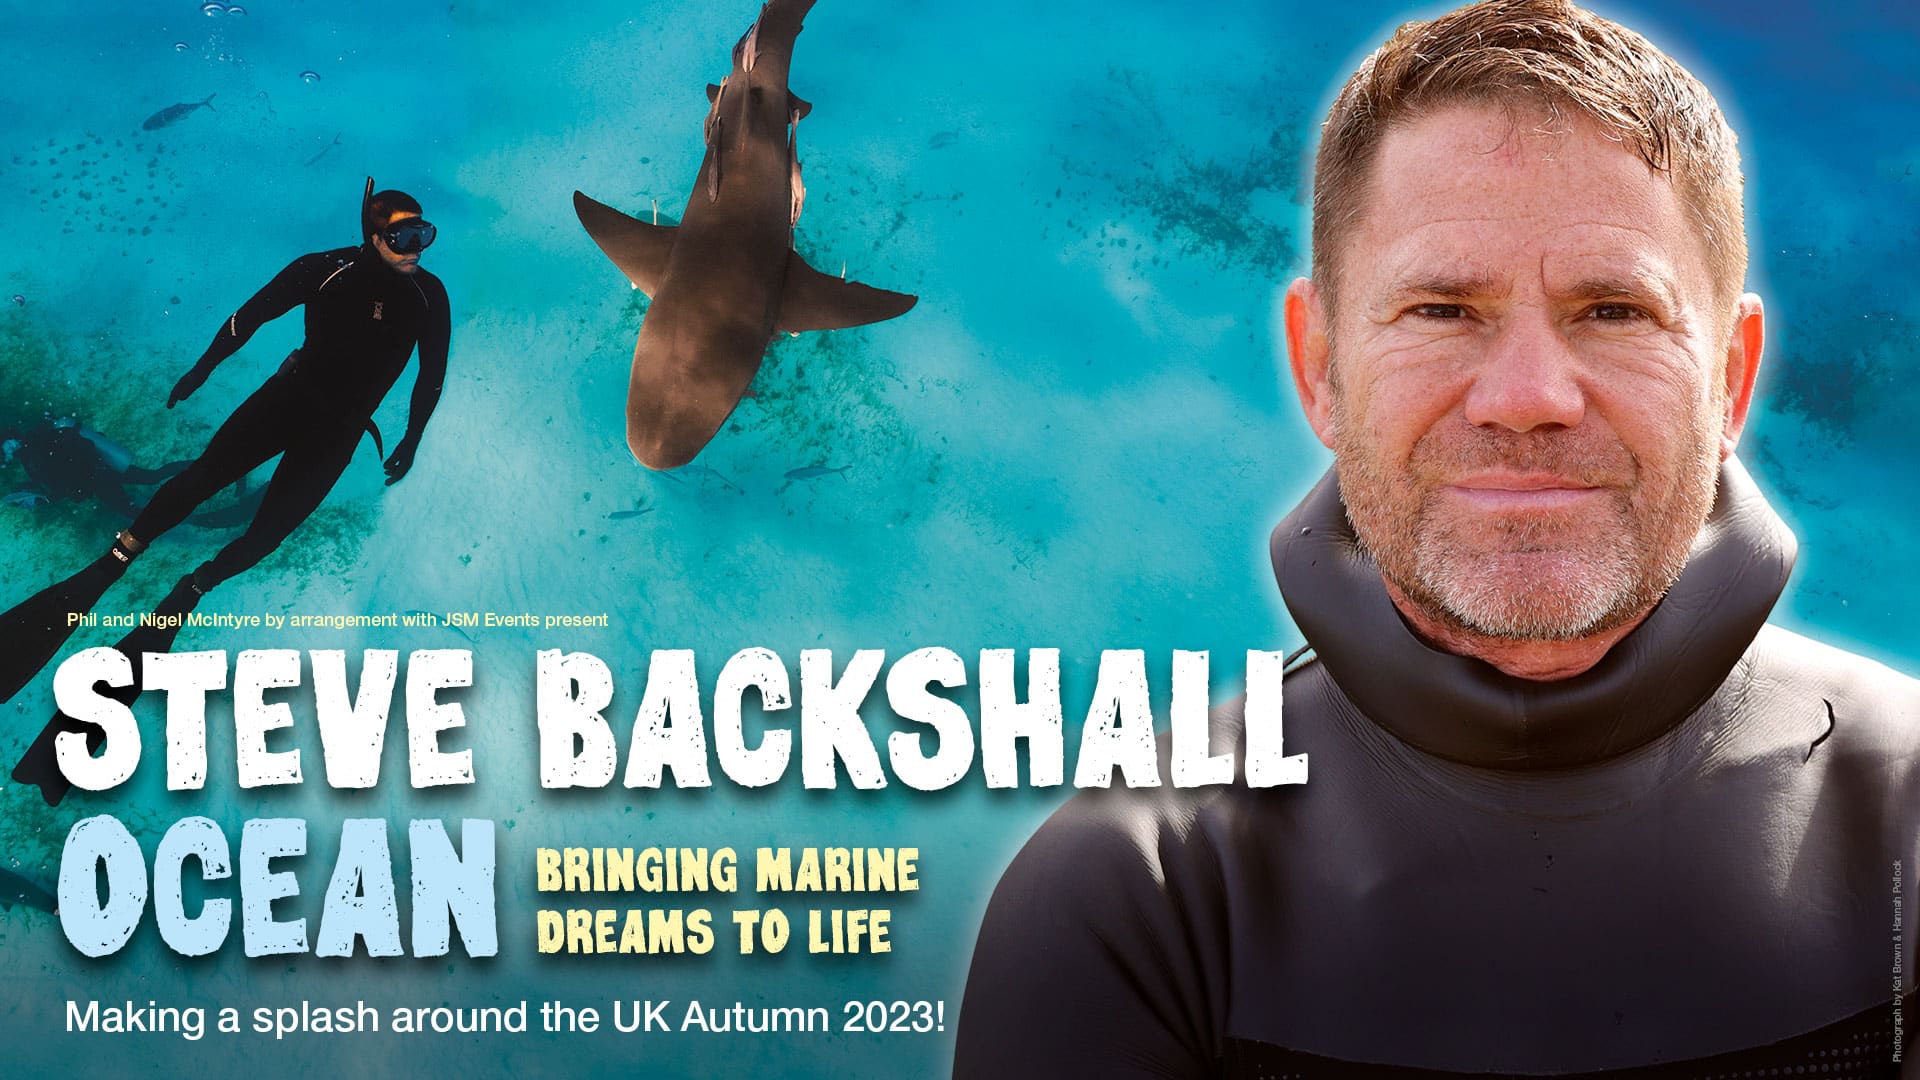 A close-up of Steve Backshall. In the background, you can see a shark in the ocean and a diver swimming nearby. Text reads: Phil and Nigel McIntyre by arrangement with JSM Events present Steve Backshall Ocean; Brining marine dreams to life; Making a splash around the UK Autumn 2023!